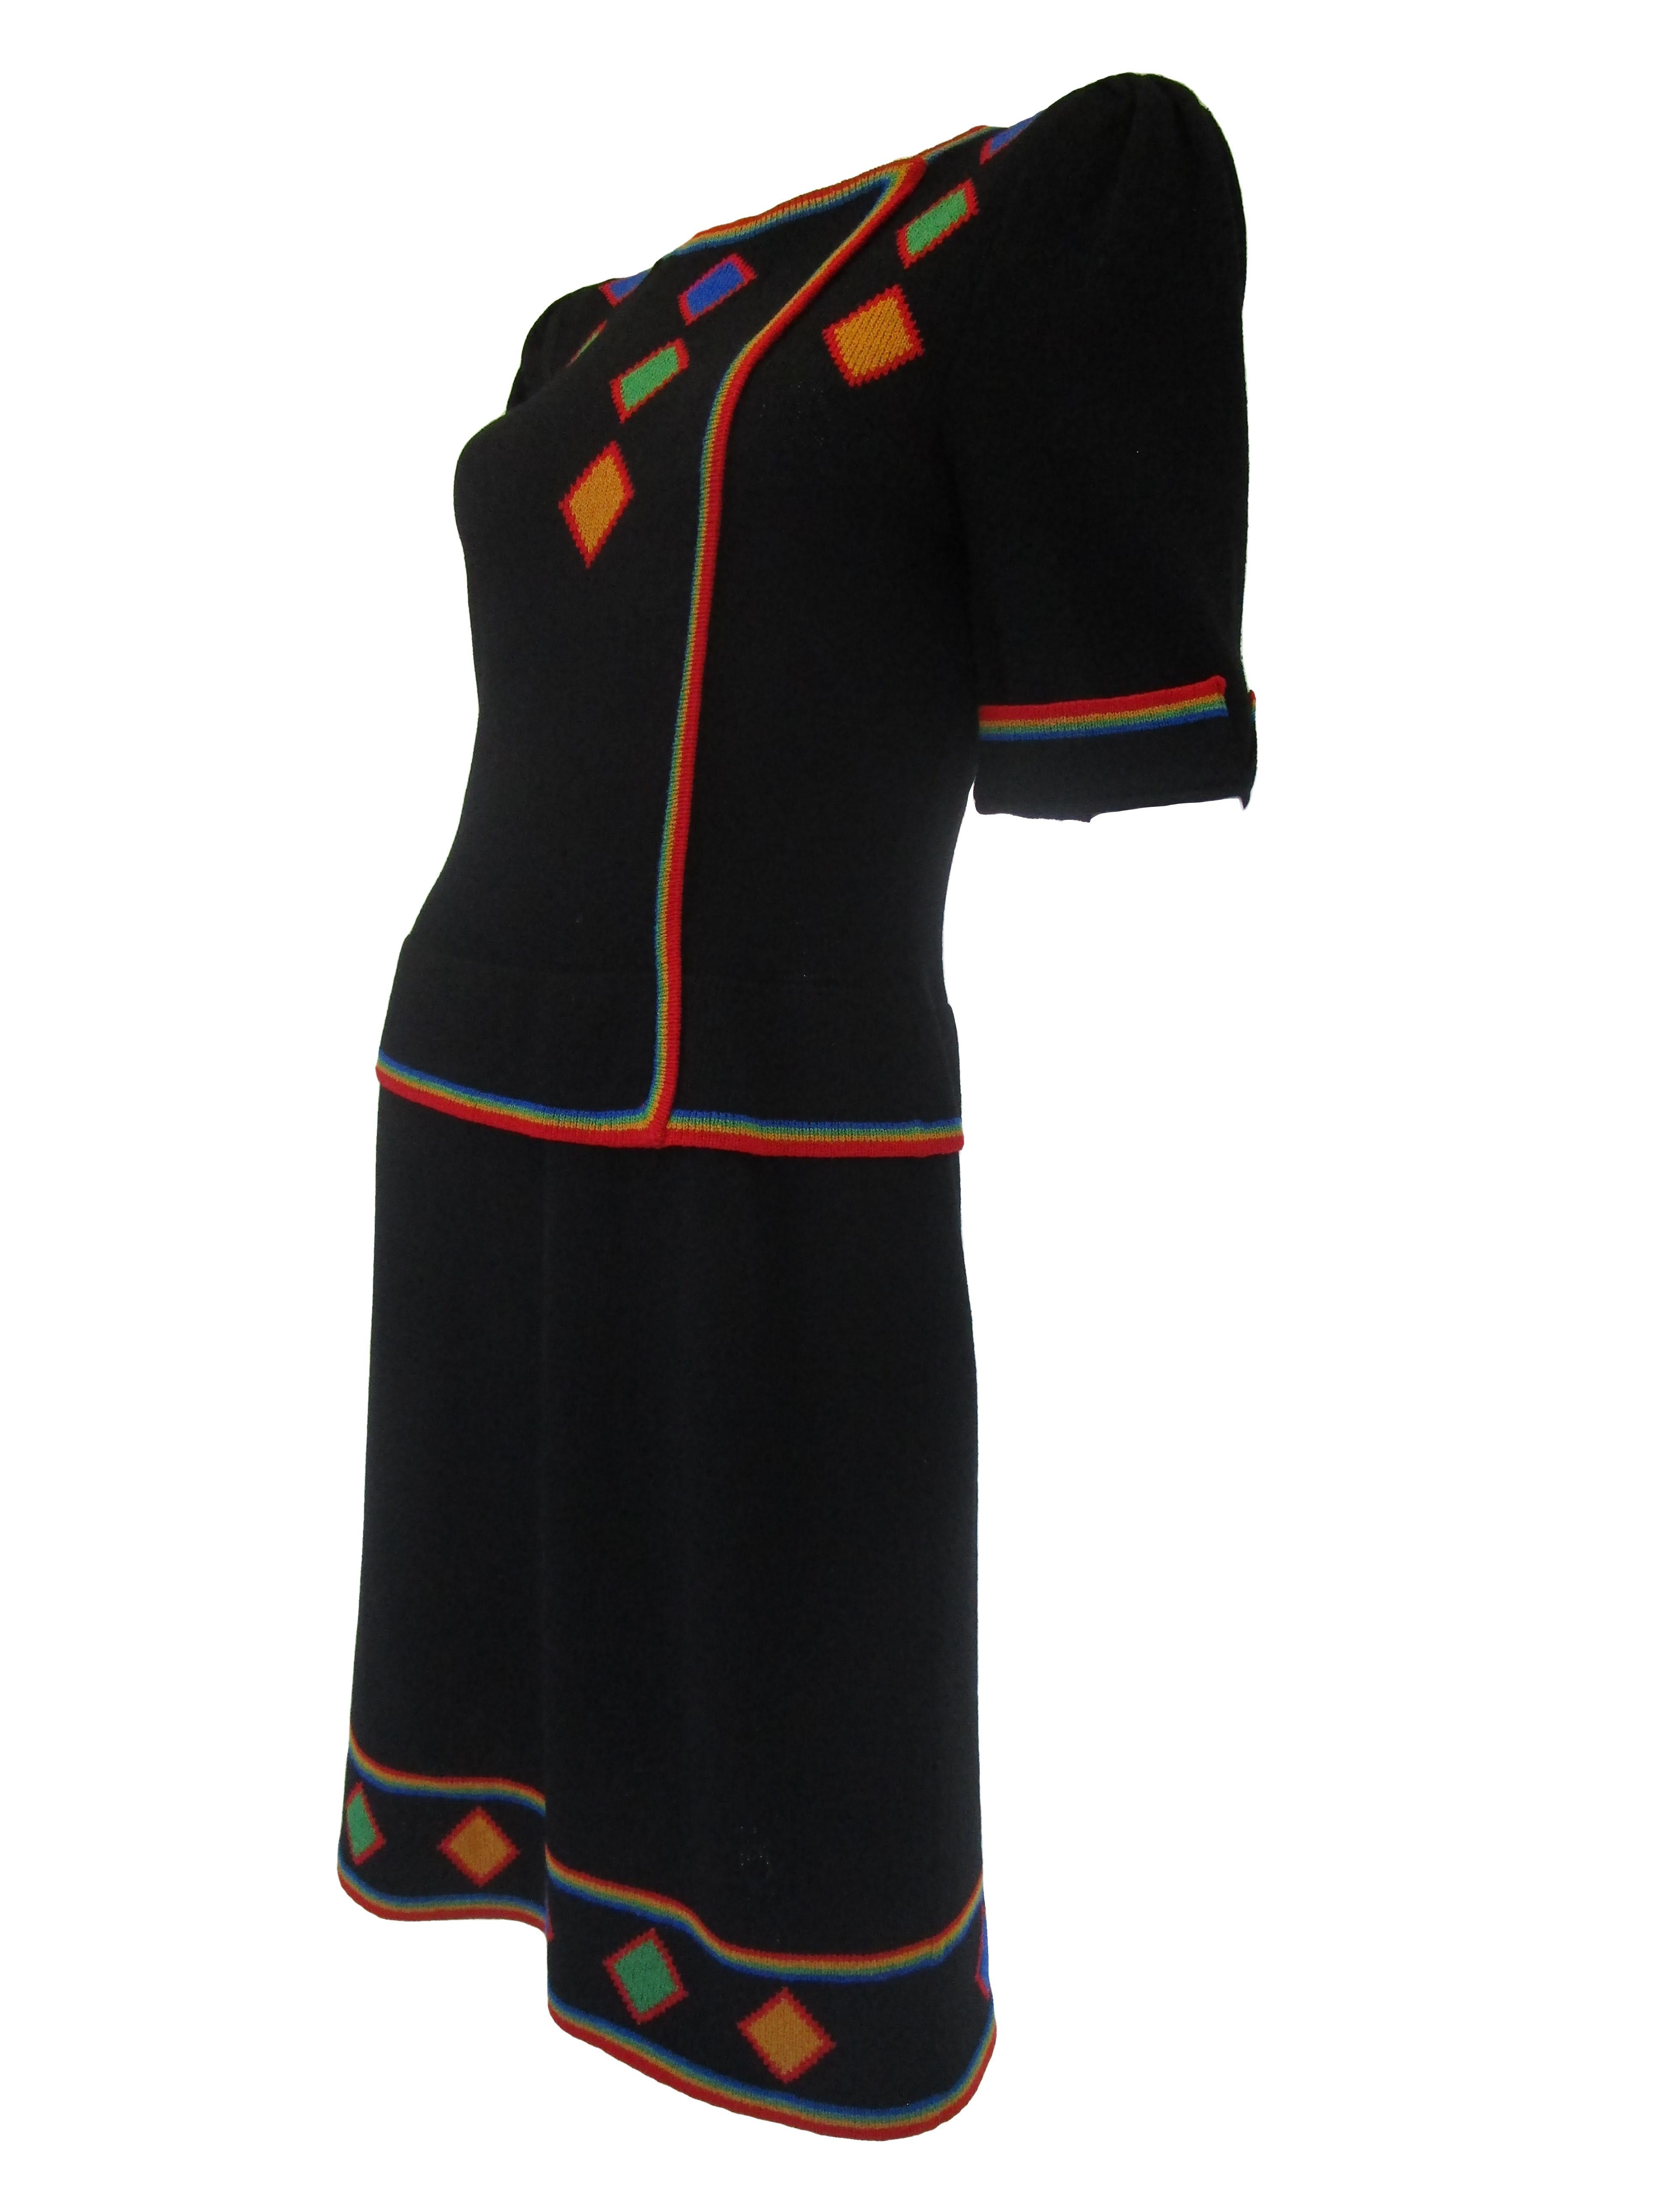 1970s Adolfo Black Knit Dress With Rainbow Details  For Sale 1